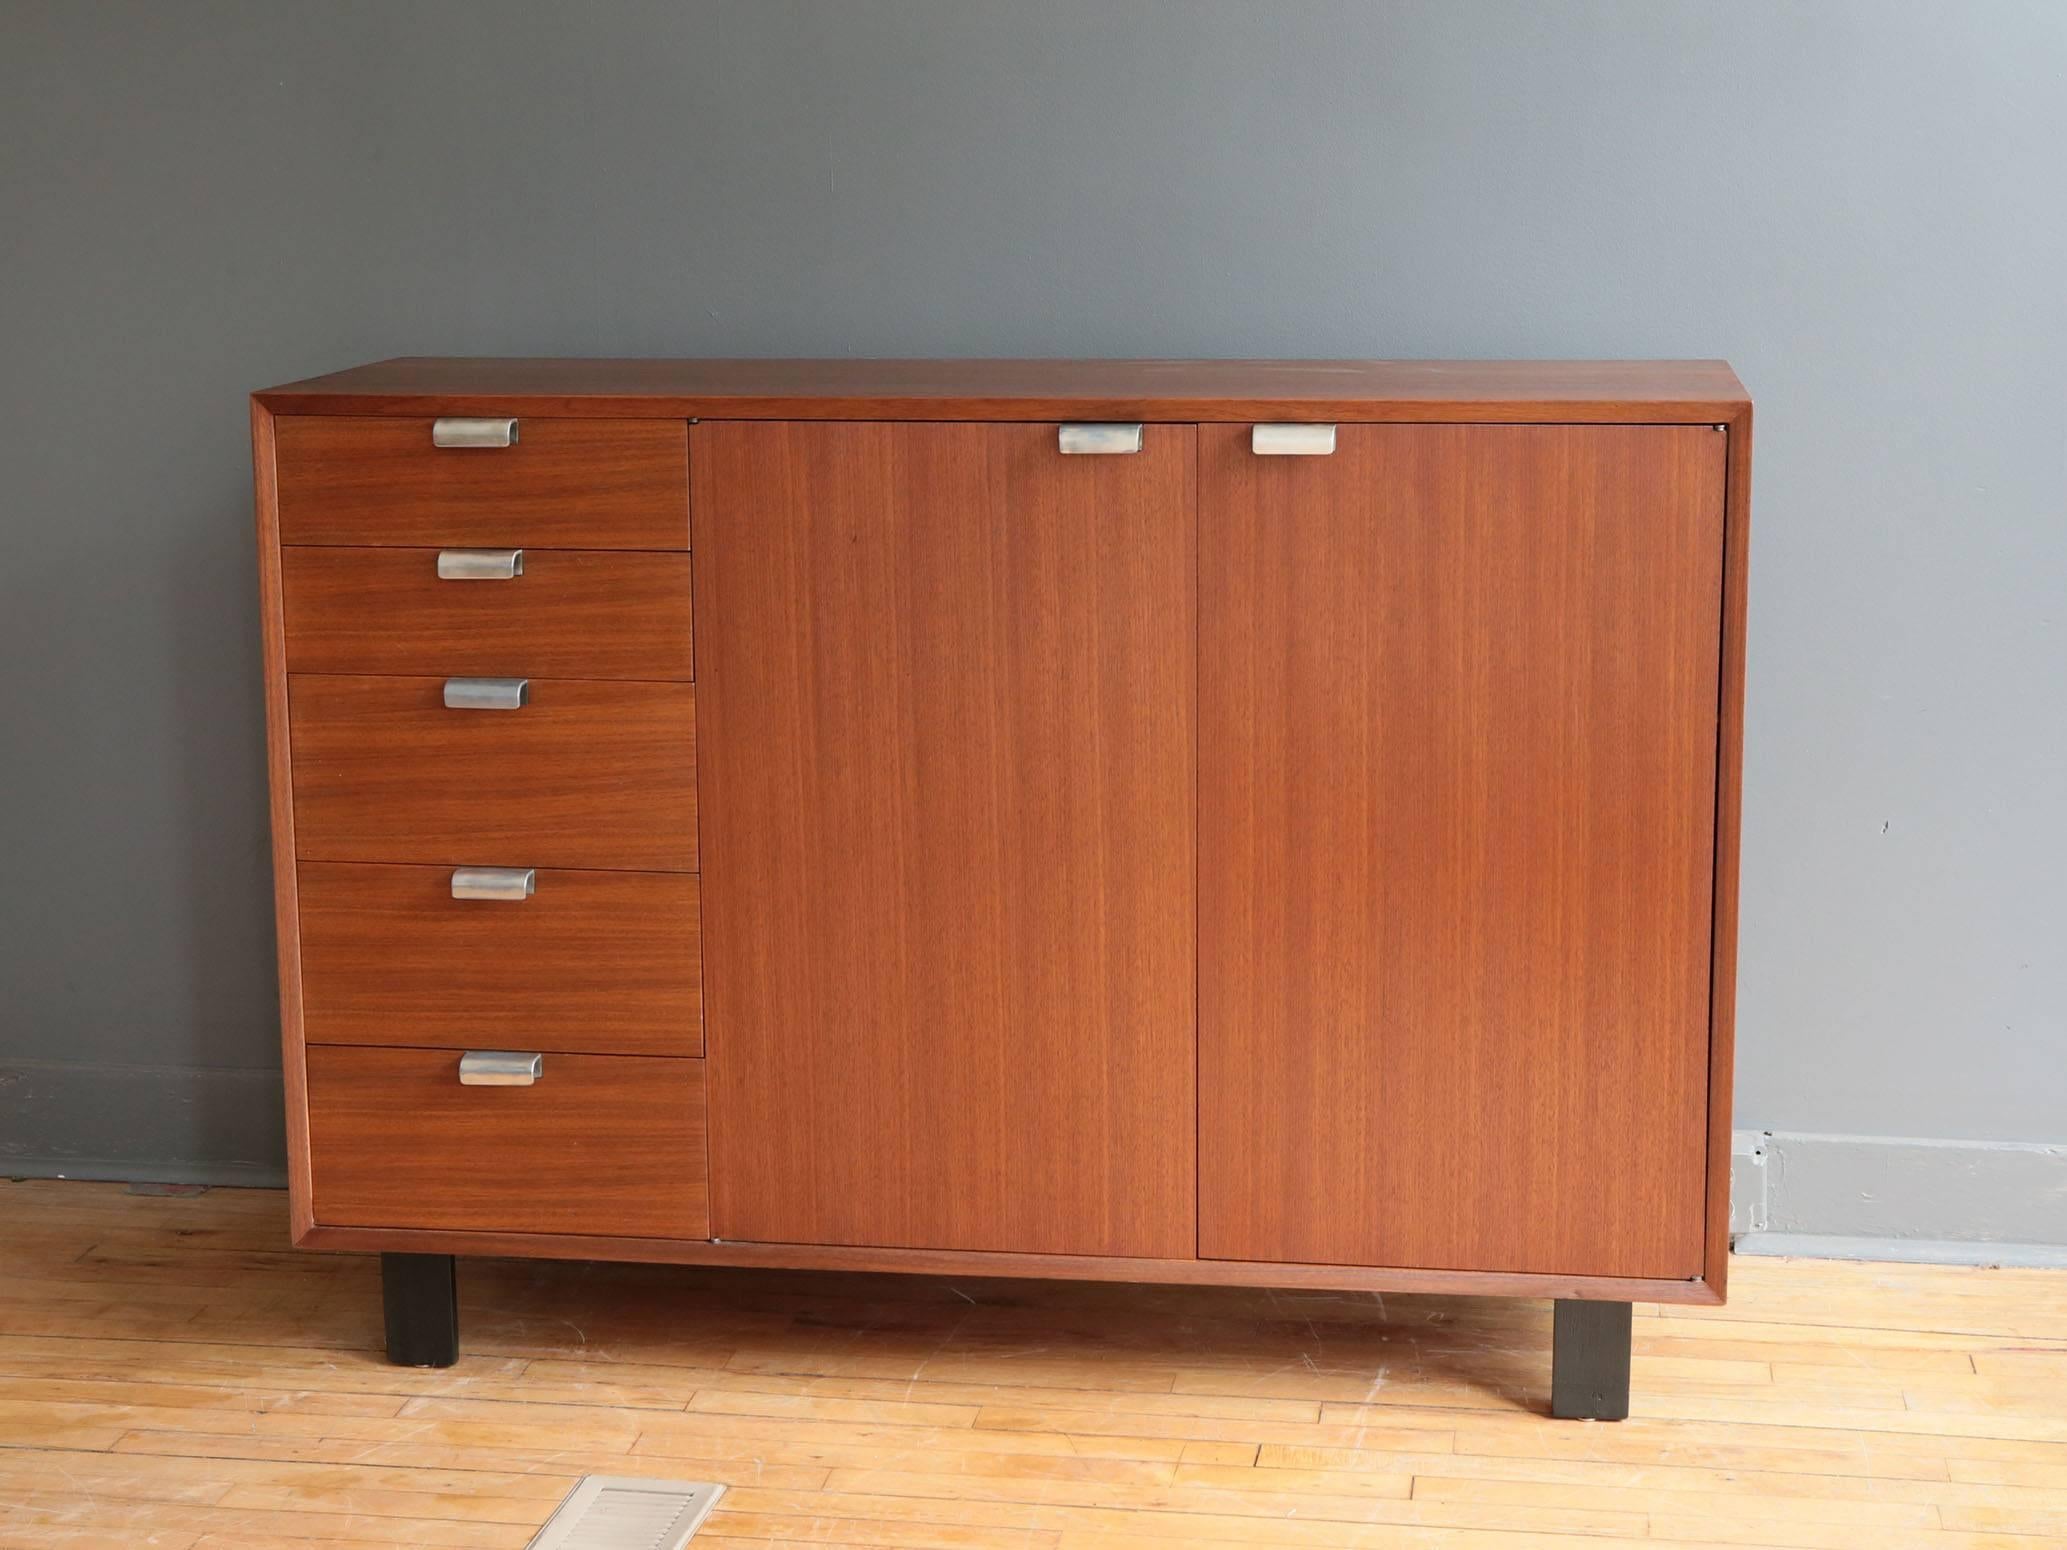 A beautifully restored primavera cabinet designed by George Nelson for Herman Miller, circa 1950s. Featuring a bank of five graduated drawers and two cabinet doors that open to reveal additional storage drawers and adjustable shelves. Original 